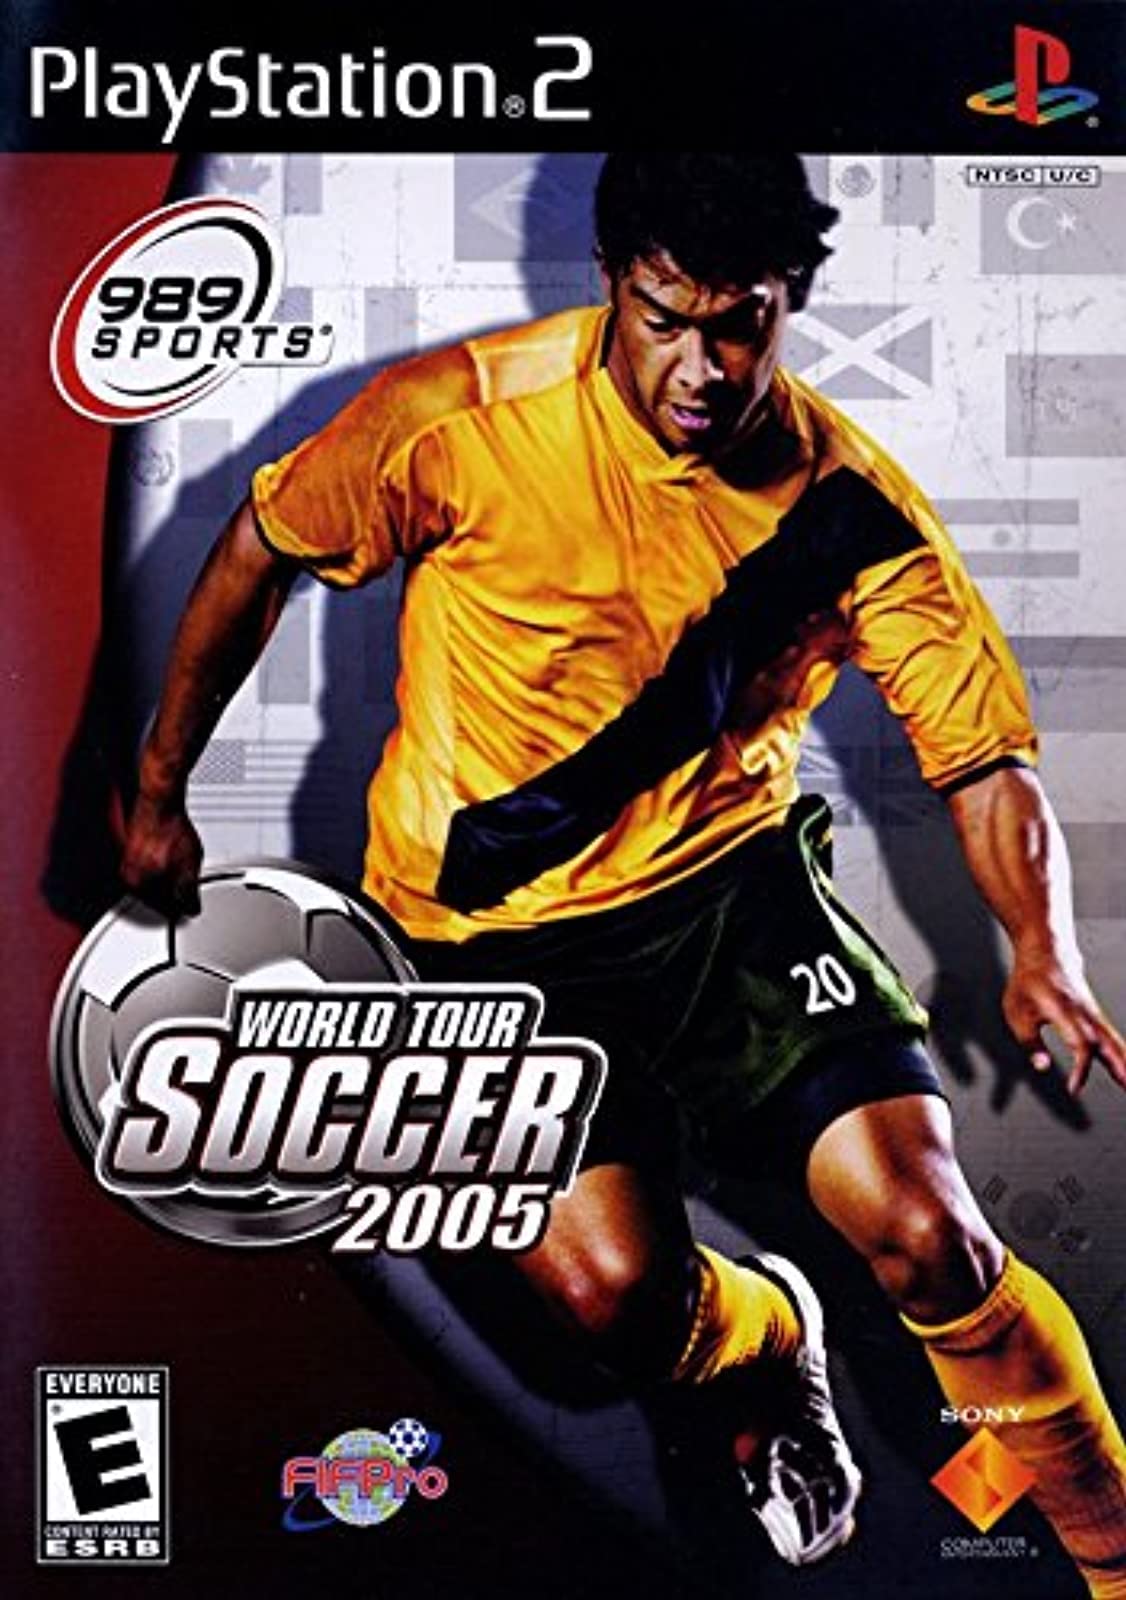 World Tour Soccer 2005 - Sony PlayStation 2 (PS2)